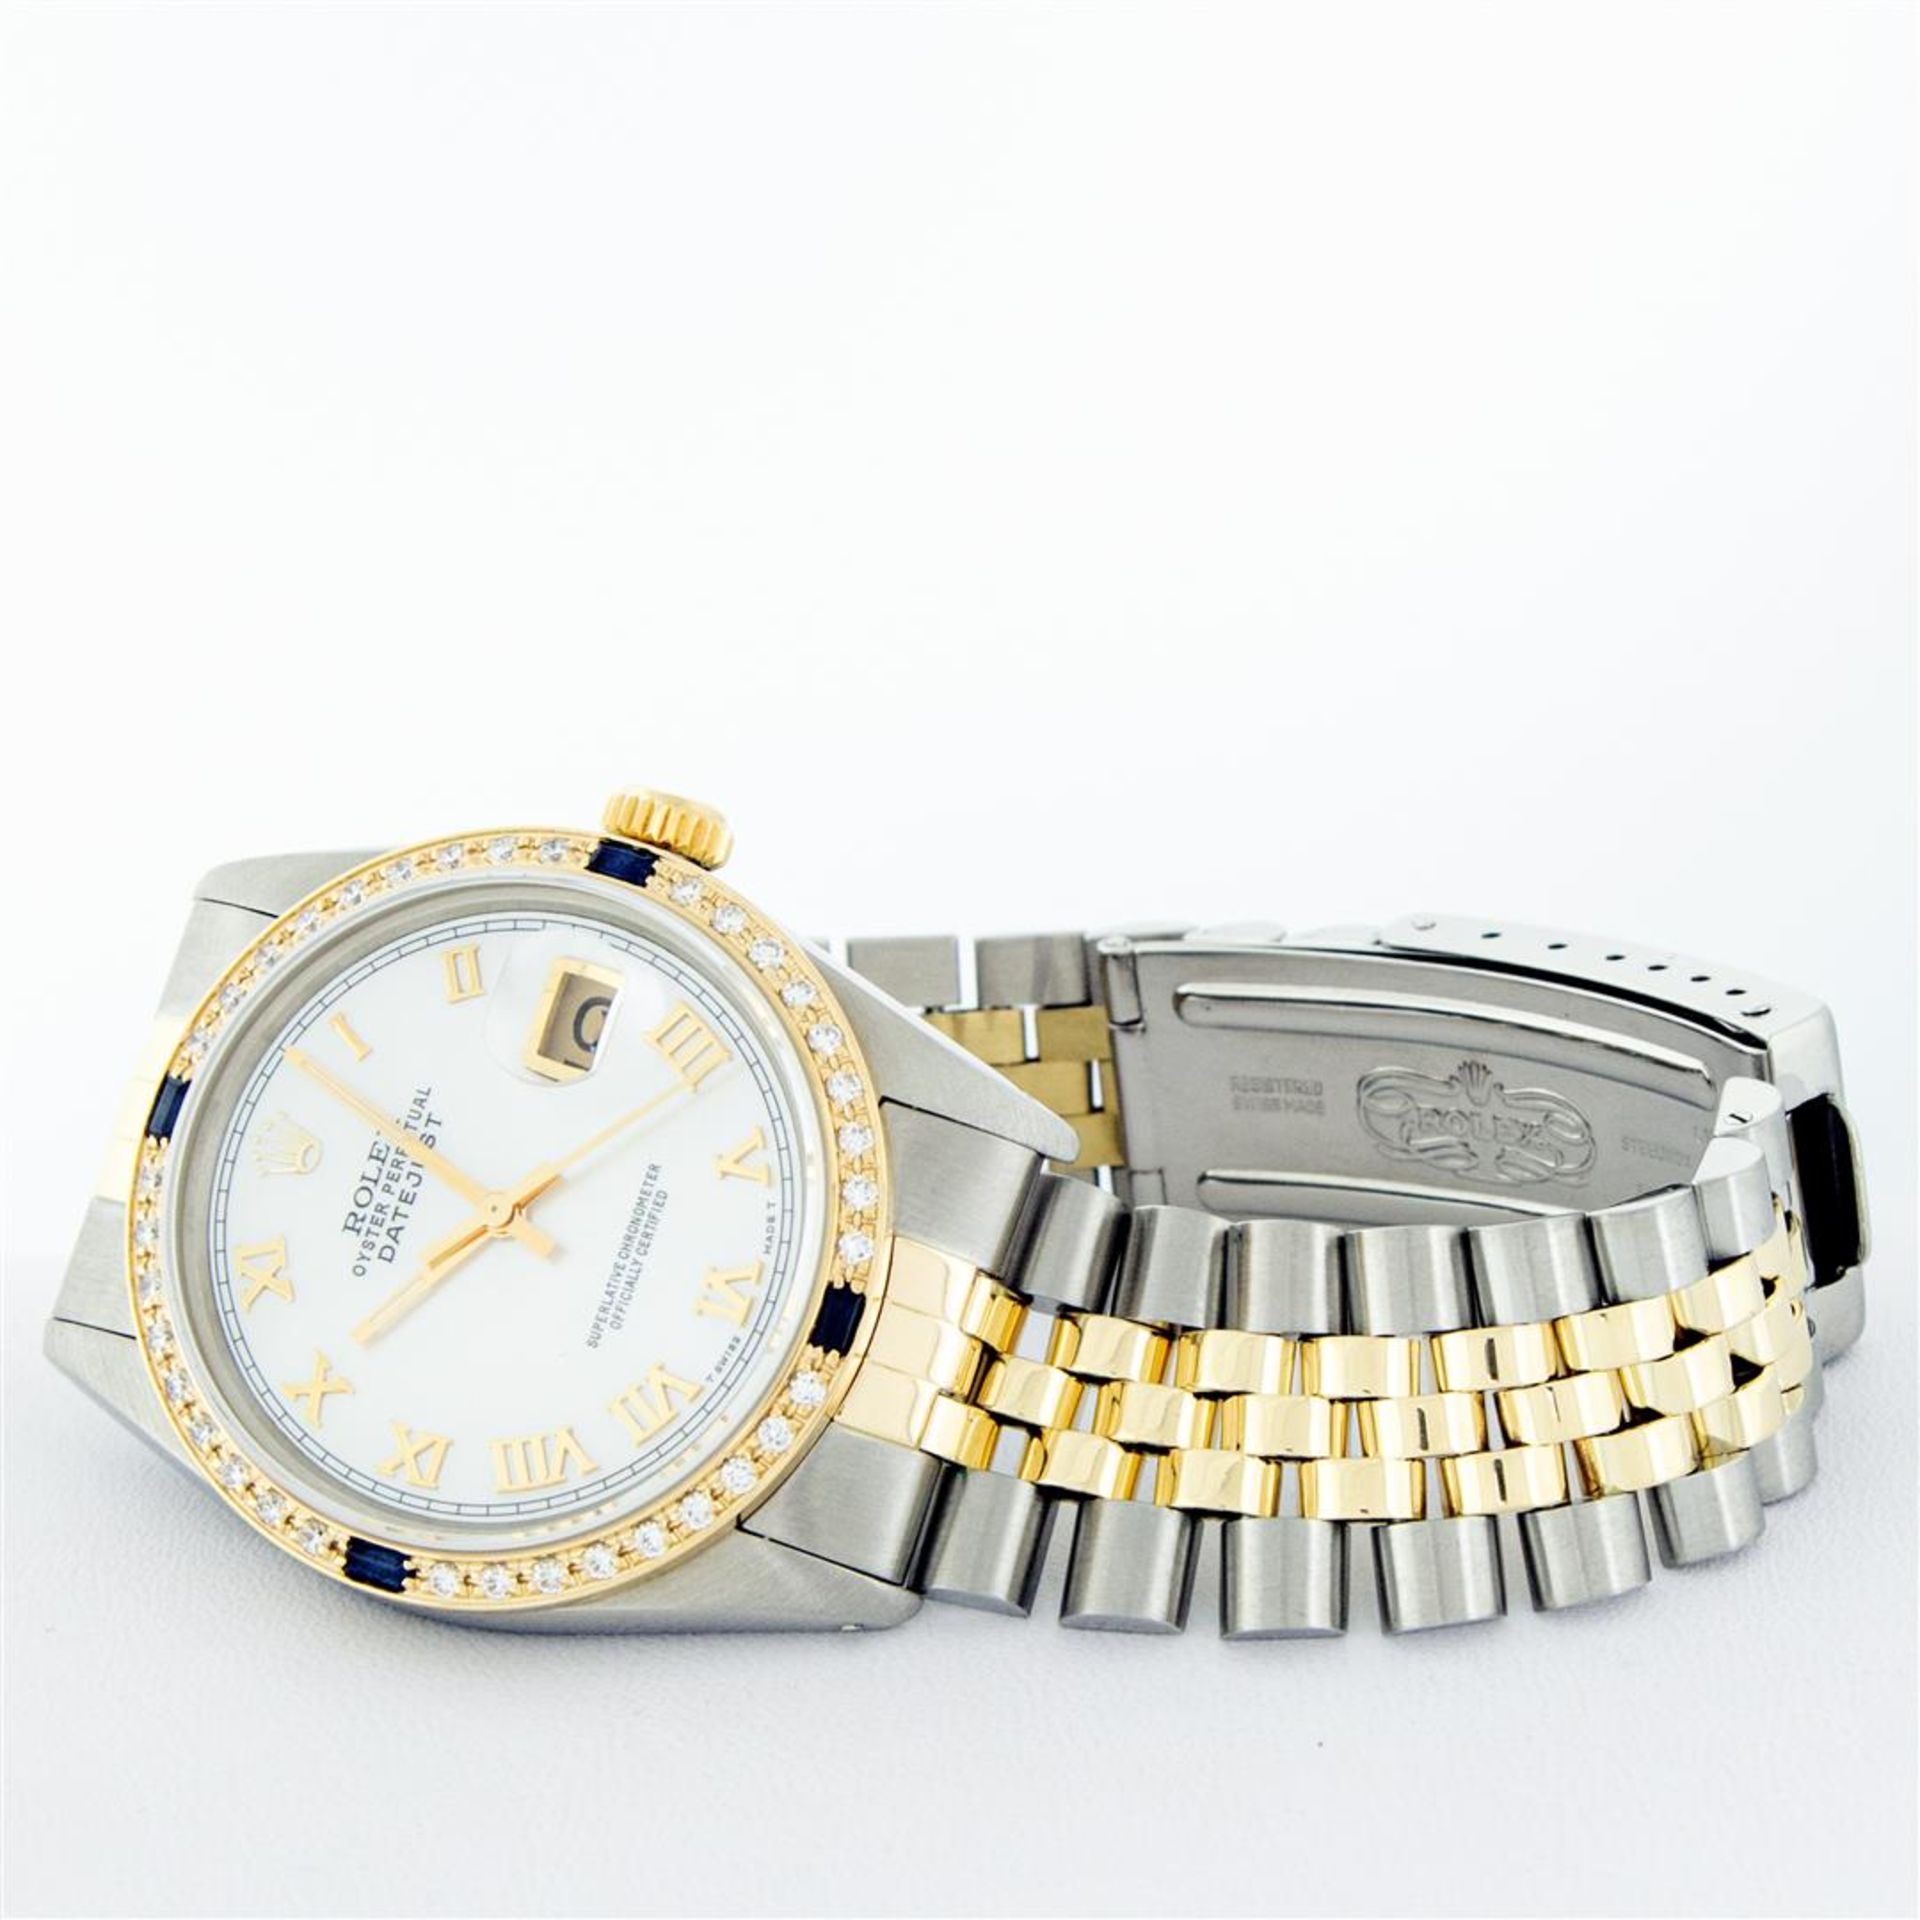 Rolex Mens 2 Tone Mother Of Pearl Diamond & Sapphire 36MM Datejust Wristwatch - Image 4 of 9